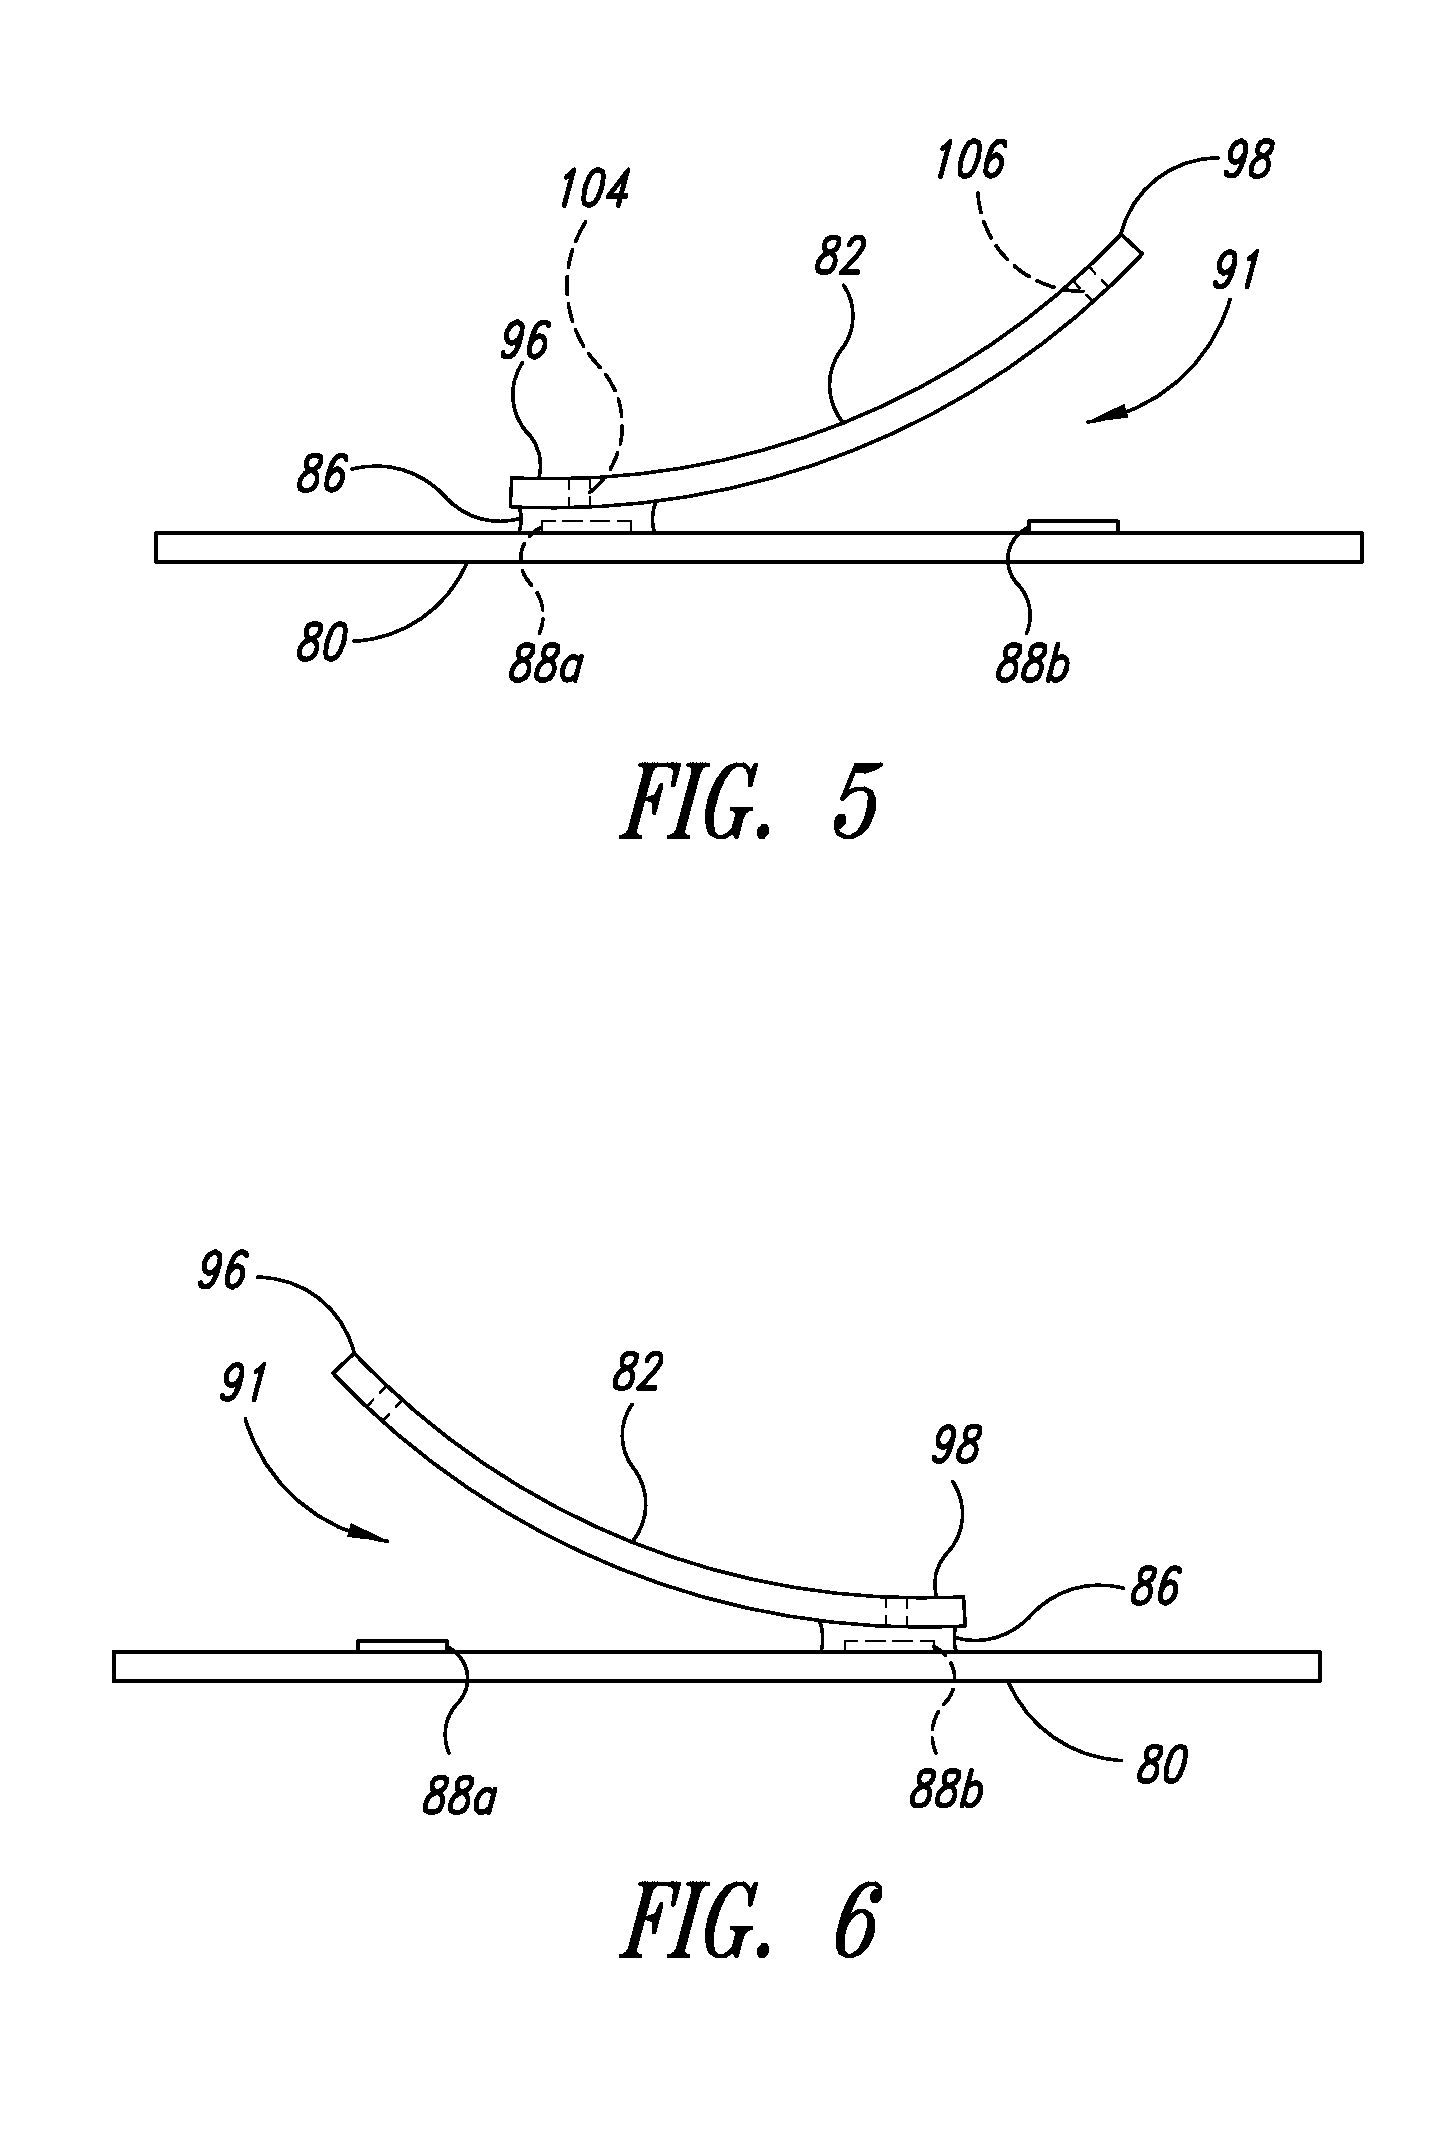 Thin film processing apparatuses for adjustable volume accommodation